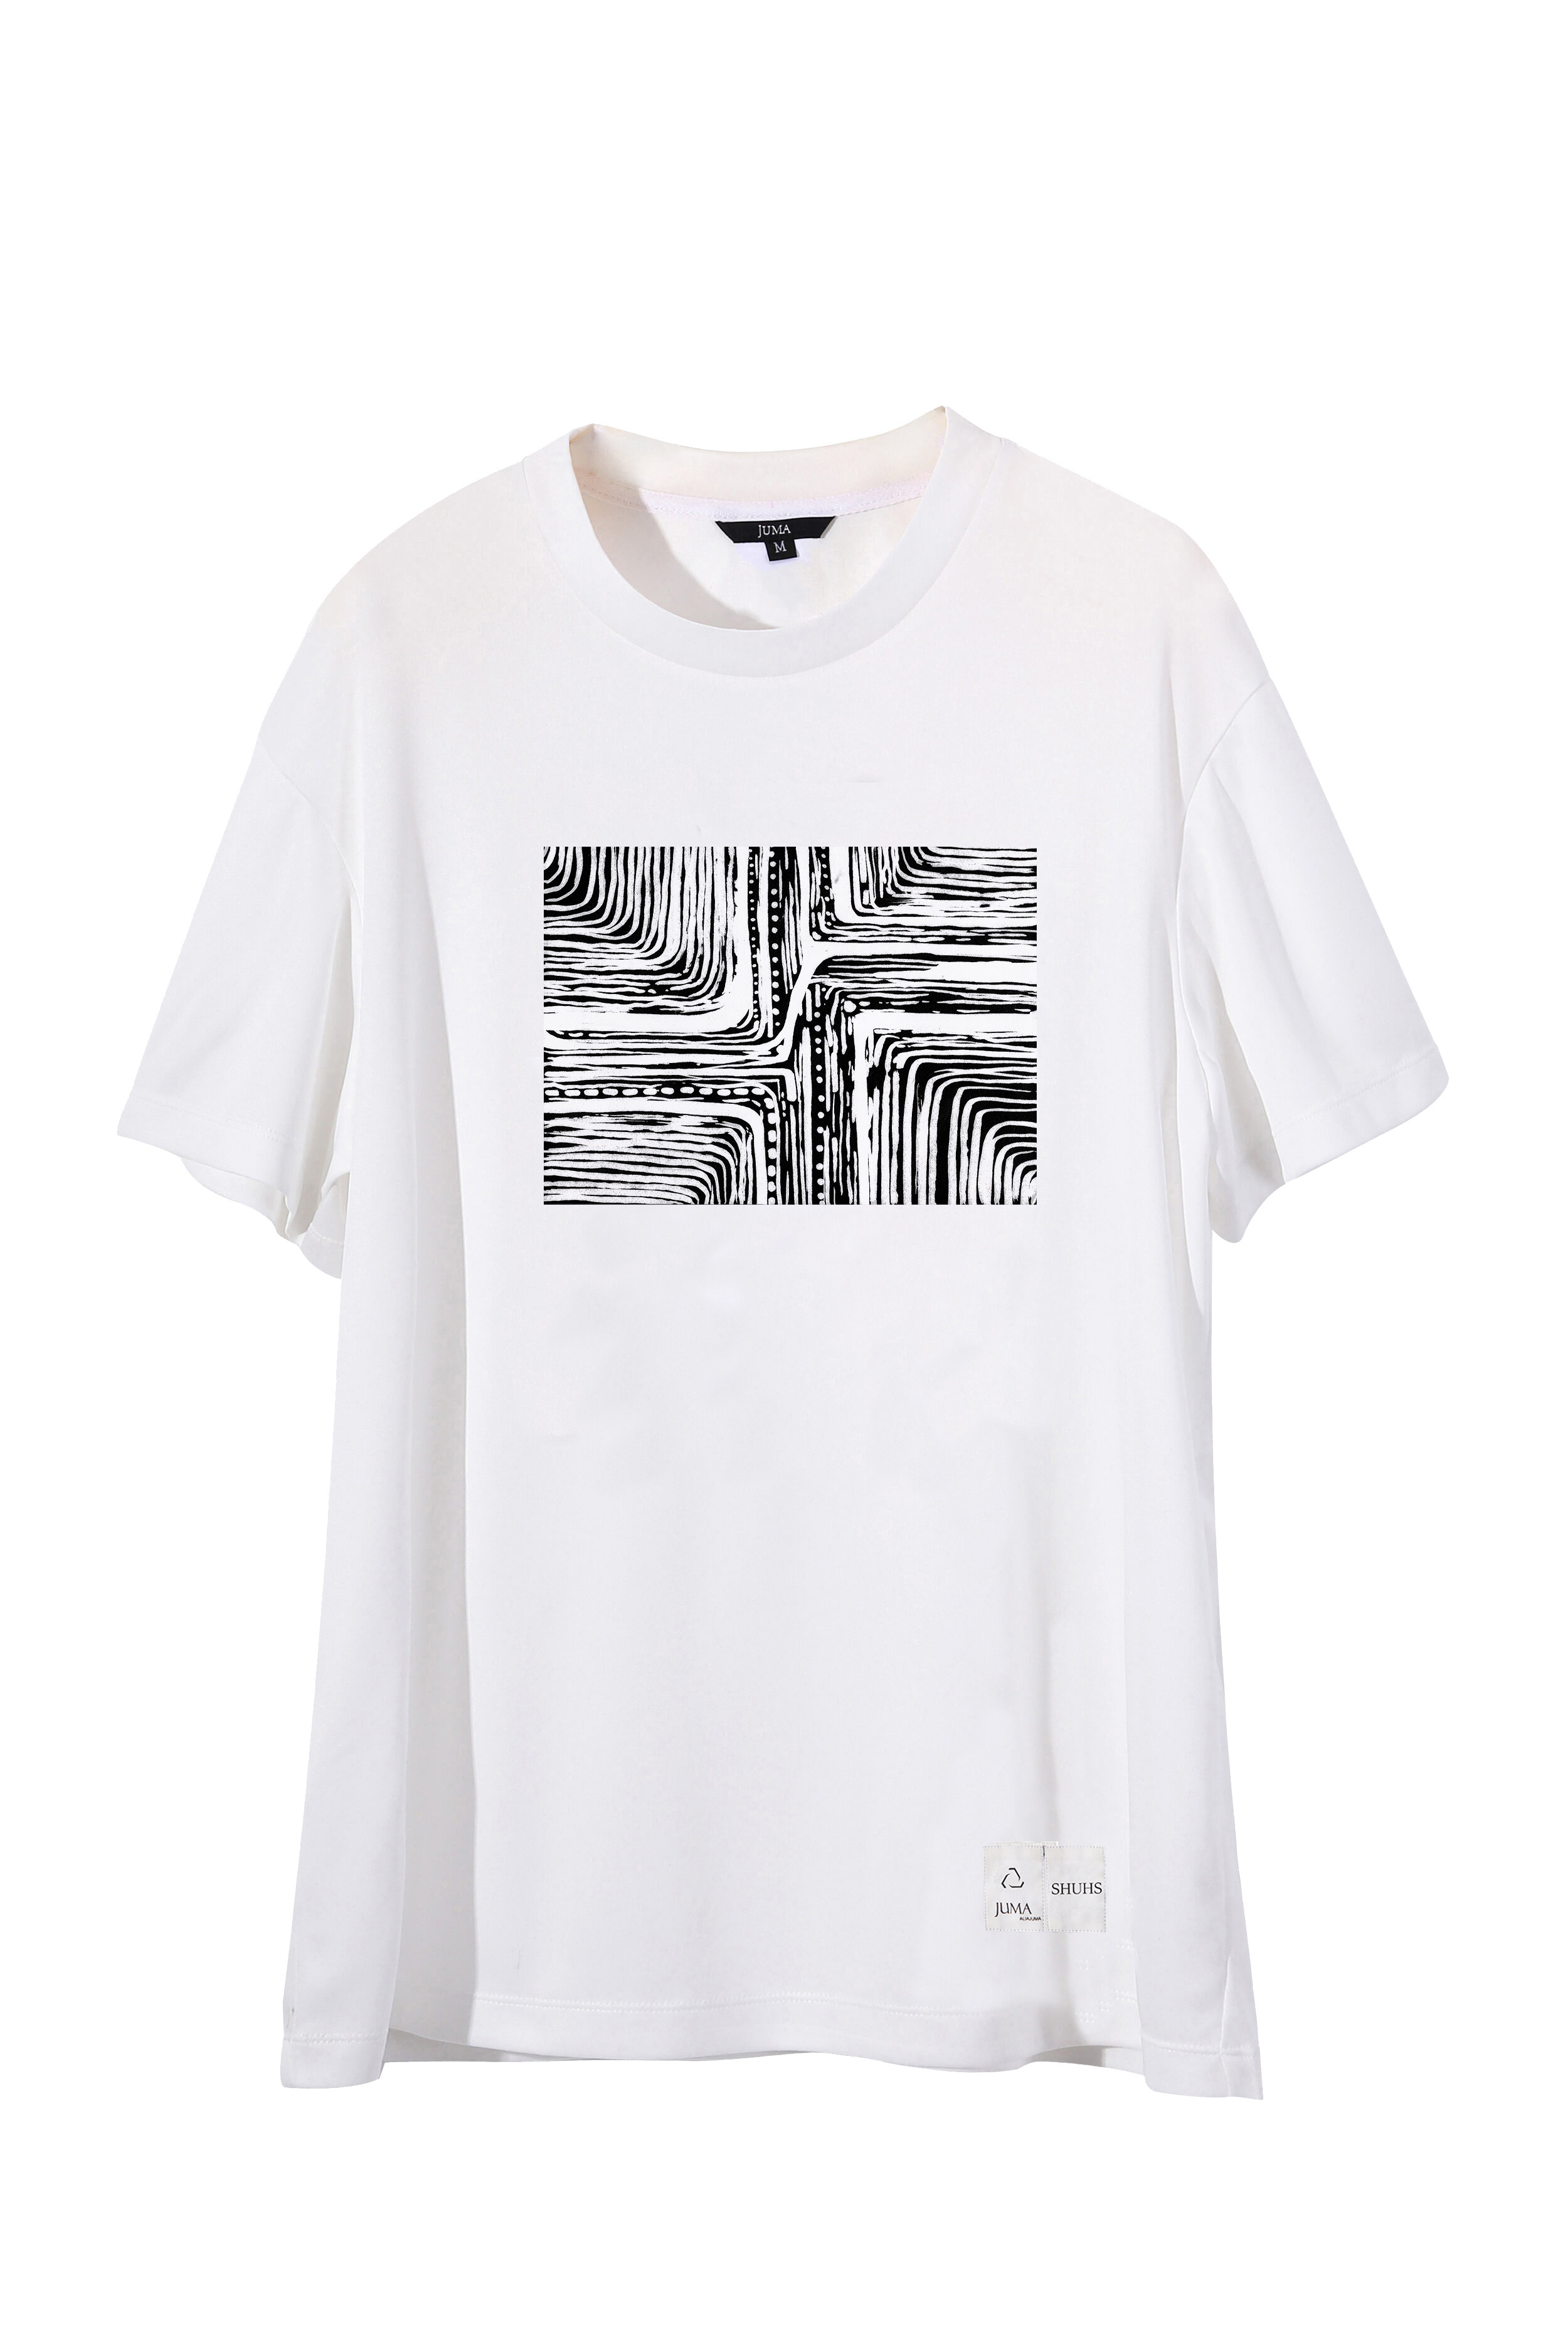 Recharge 印花 3 件 T 恤 - 4 个再生水瓶 - 白色的｜Recharge Print 3 T-Shirt - 4 Recycled Water Bottles-White